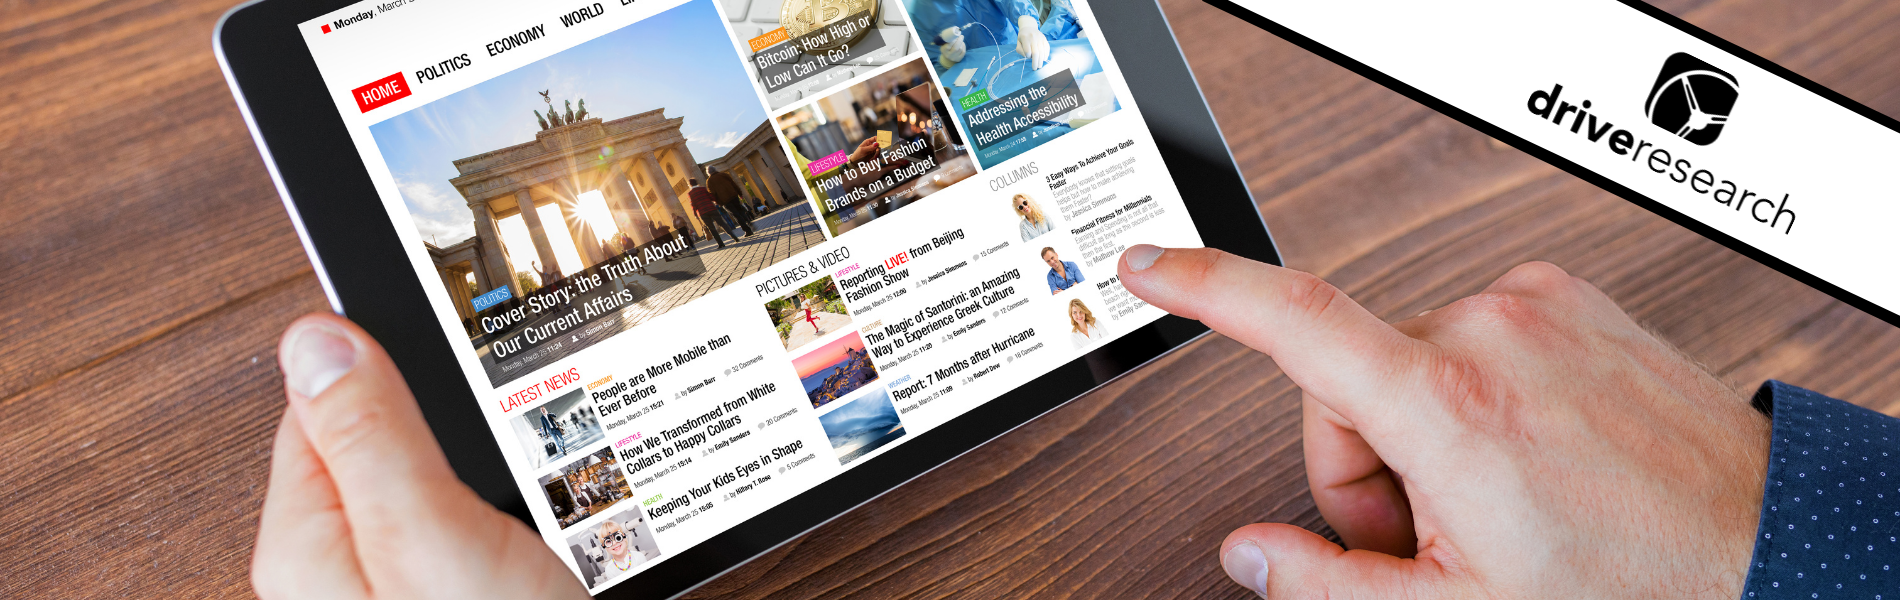 finger scrolling ipad for different news stories